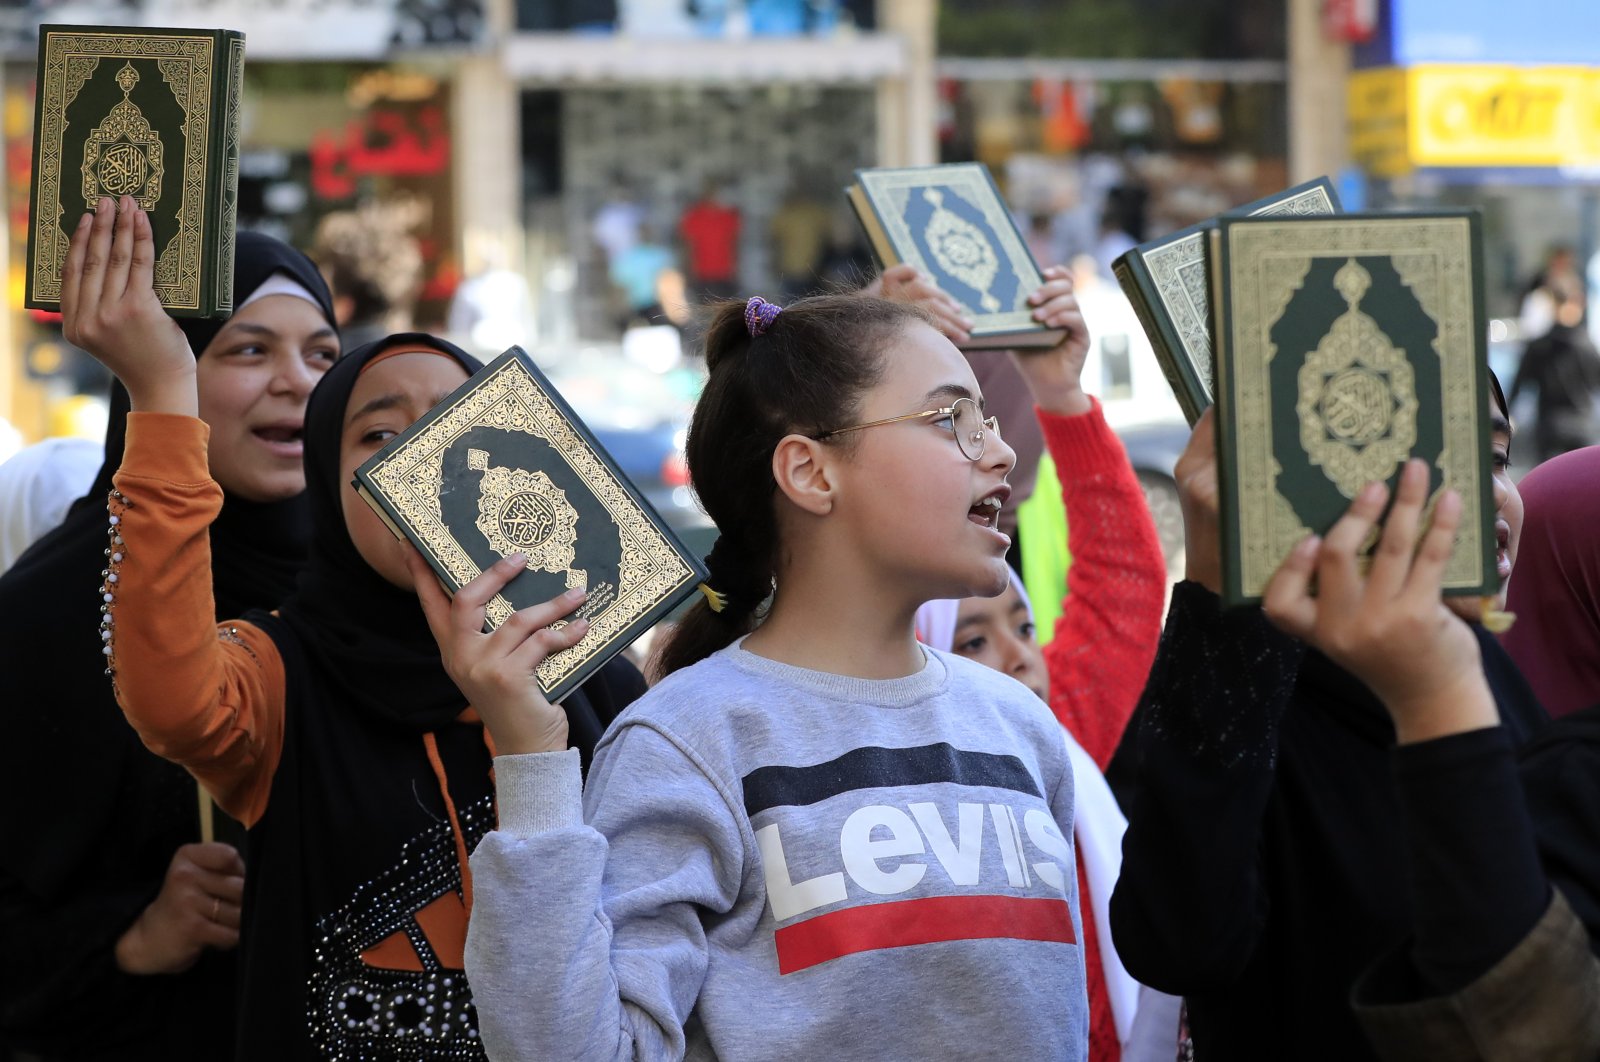 Muslim girls hold up the Islamic holy book "Quran," during street performances in Sidon, Lebanon, April 1, 2023. (AP Photo)